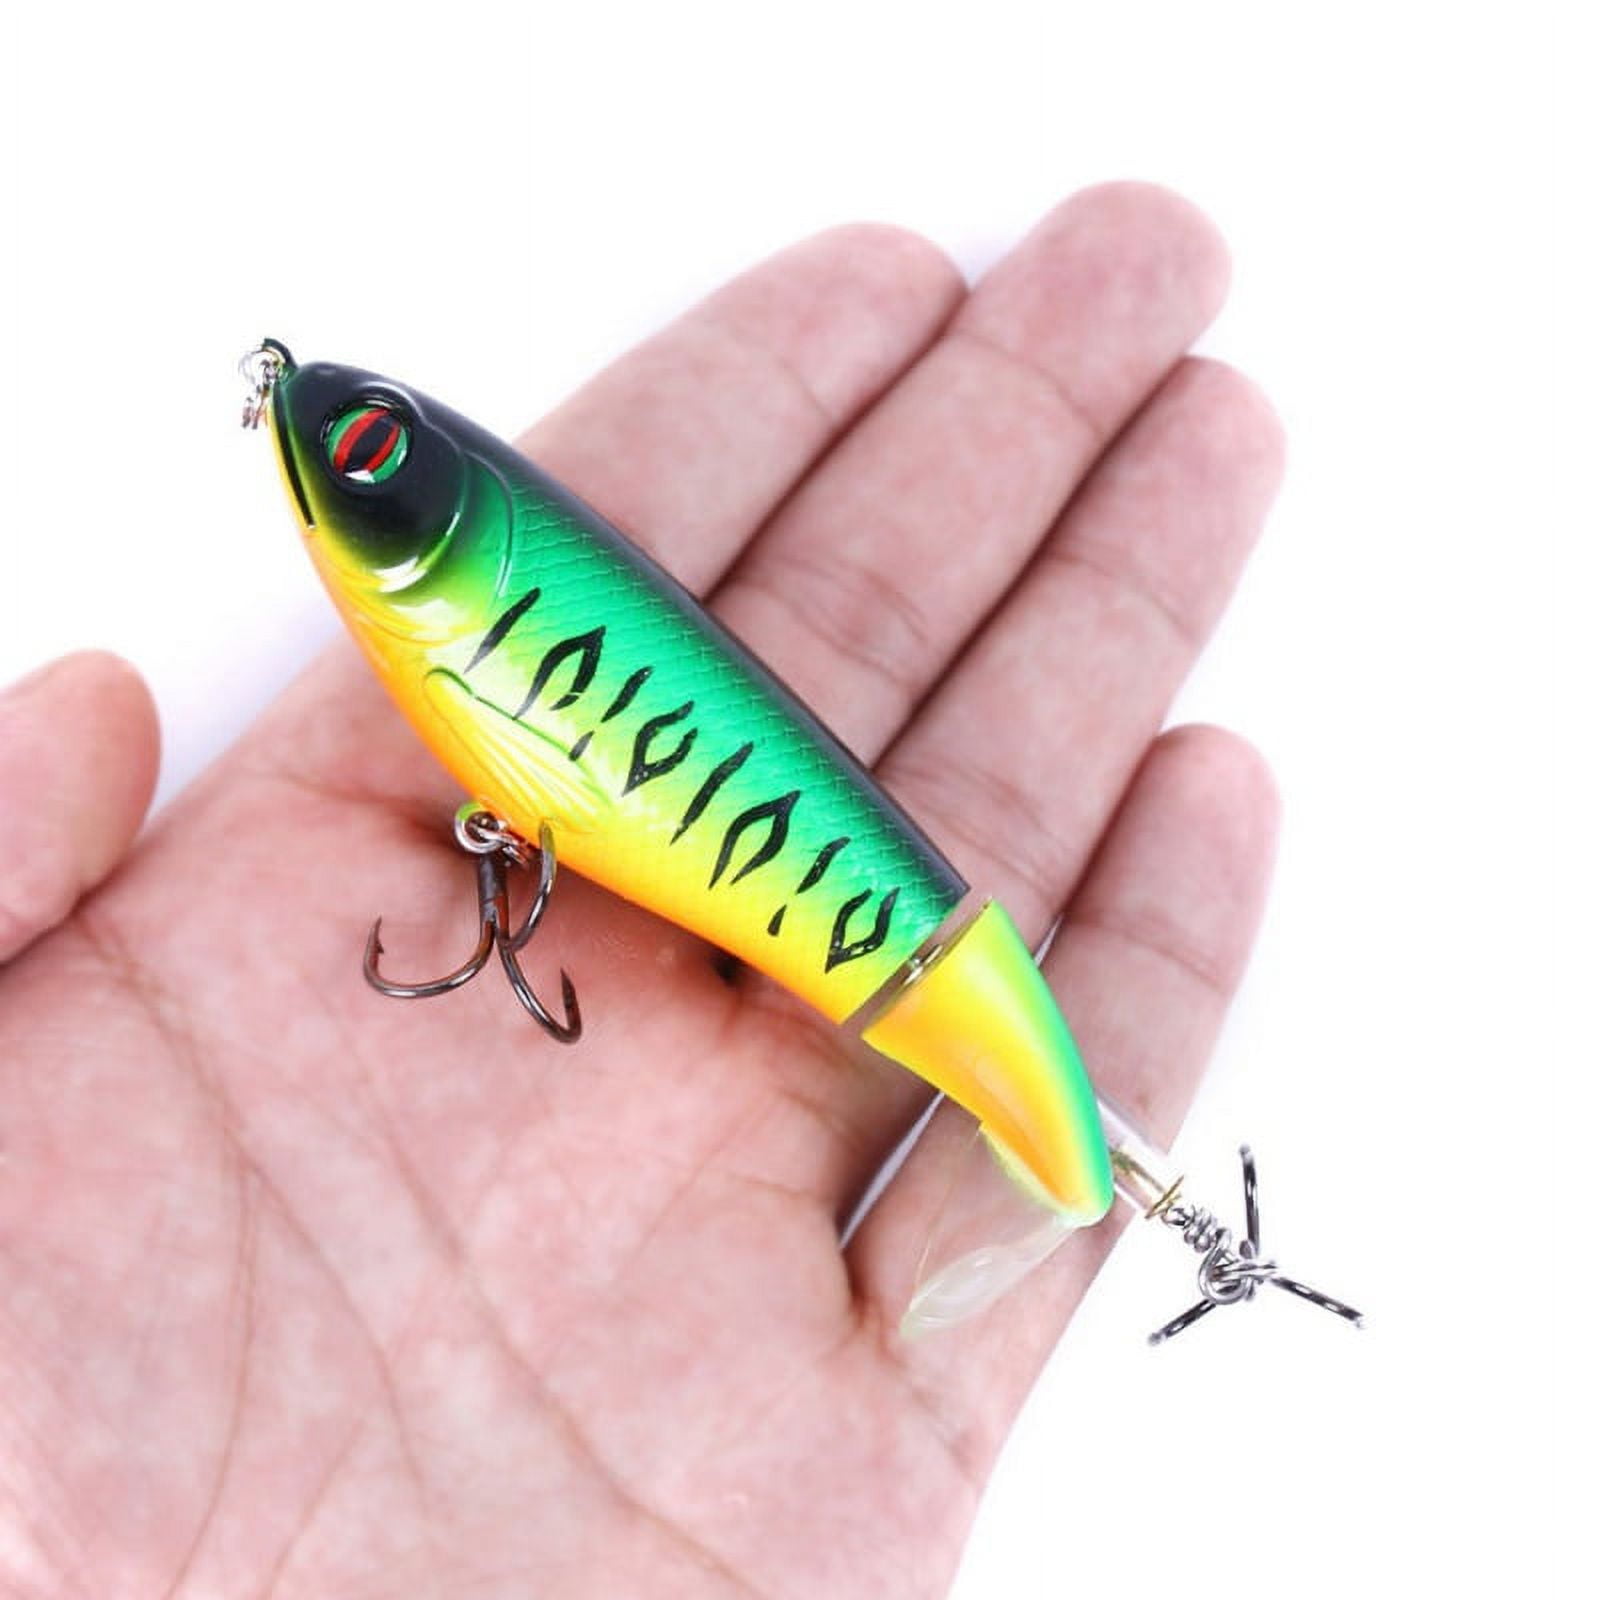 9cm/17g Fishing Lure 3D Eyes Plopper With Soft Rotating Tail Fishing Tackle  Artificial Hard Bait 